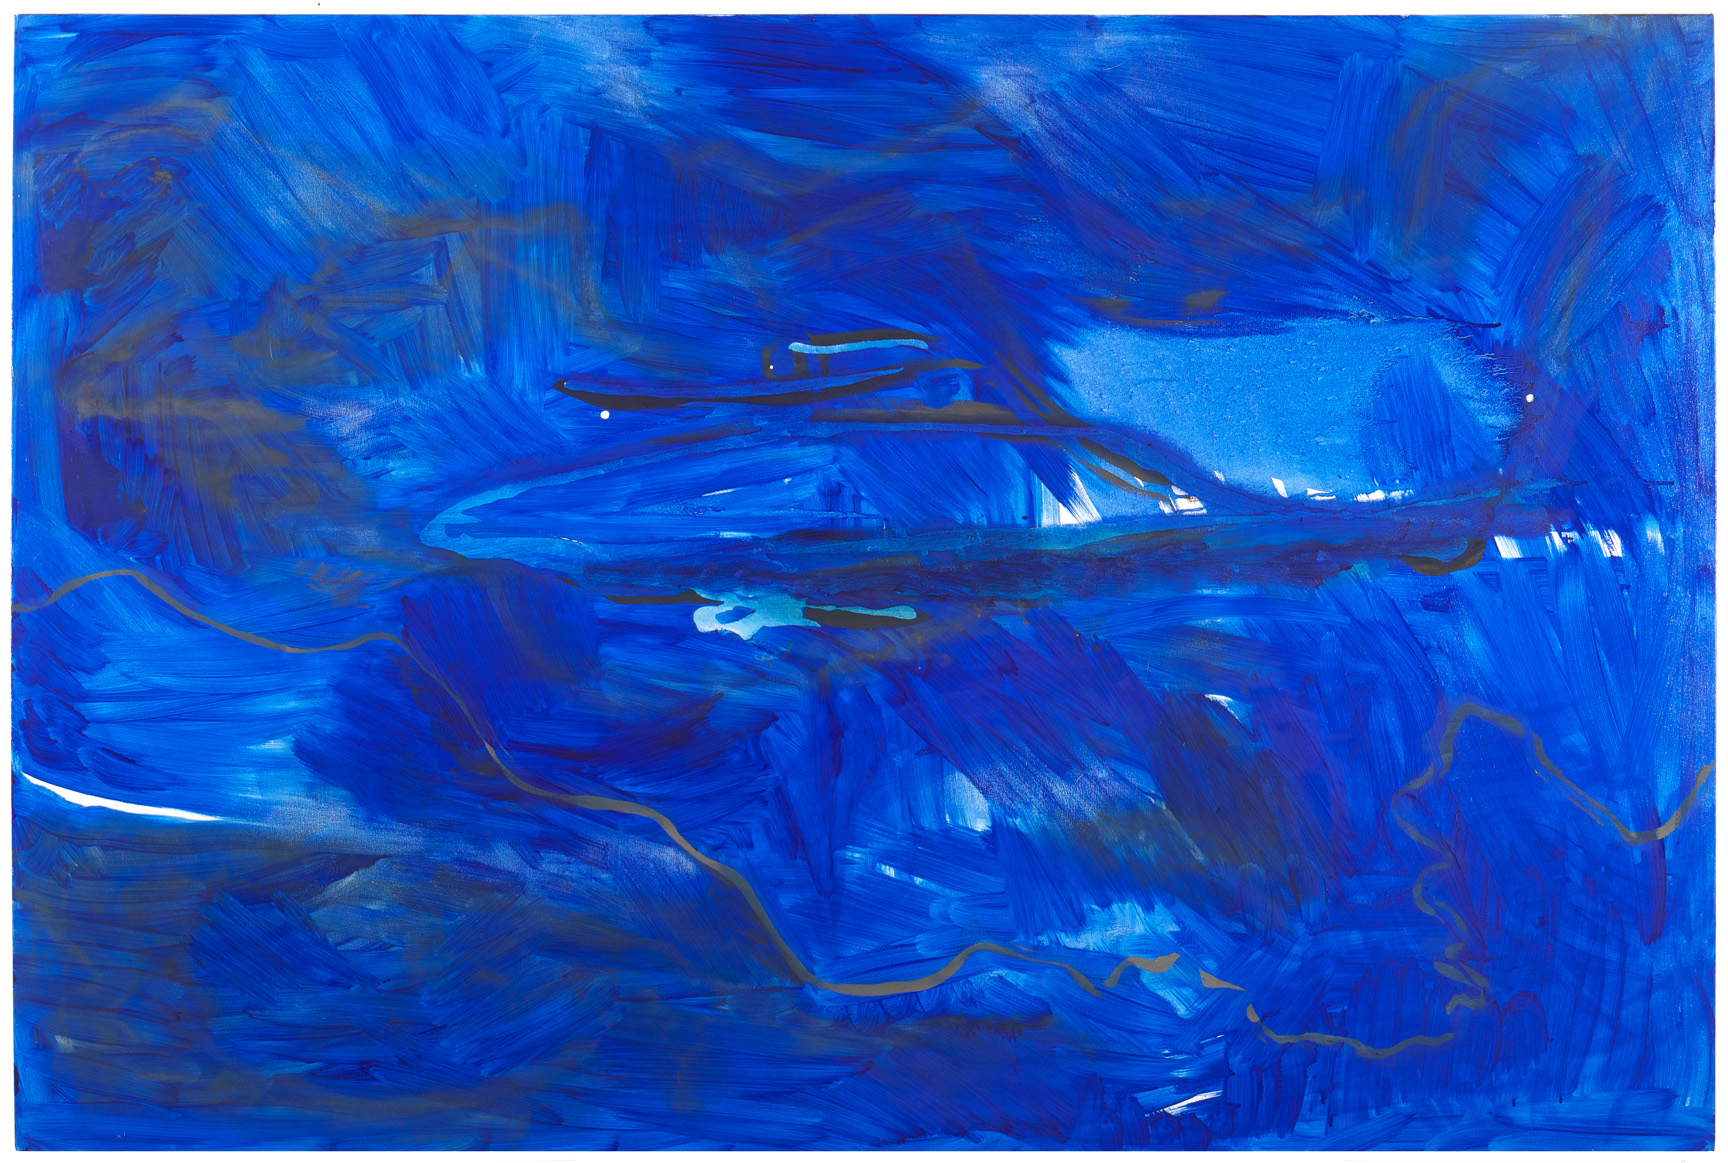  Field 3, 2011, oil on canvas, 48 x 72 inches 